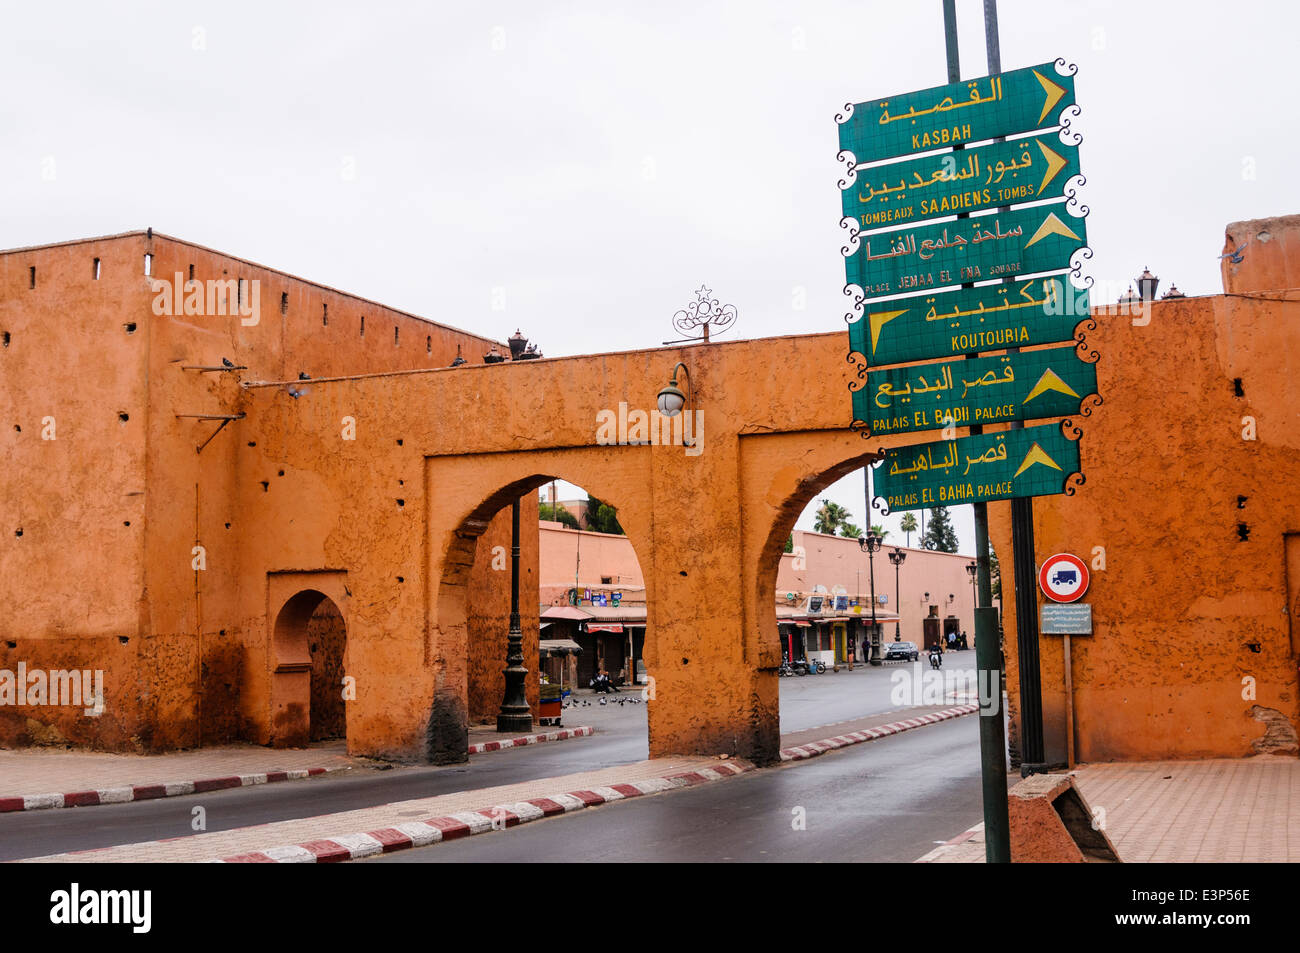 Road goes through two arches as one of the city gates at the ramparts, Marrakech, Morocco. Stock Photo